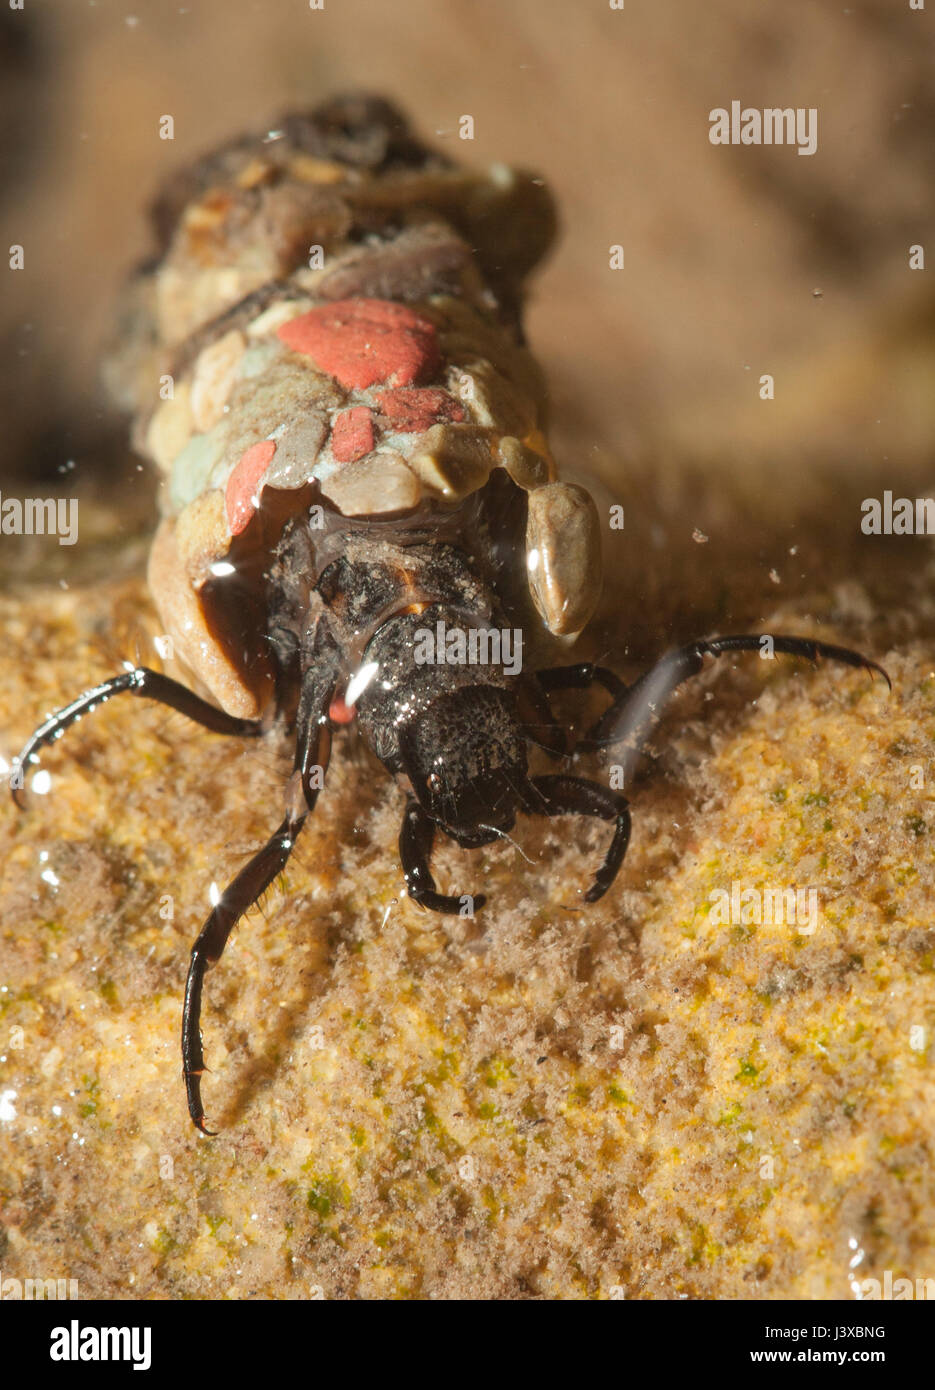 A close up of a caddisfly larva (order Trichoptera) with its mobile home of attached pebbles. Stock Photo